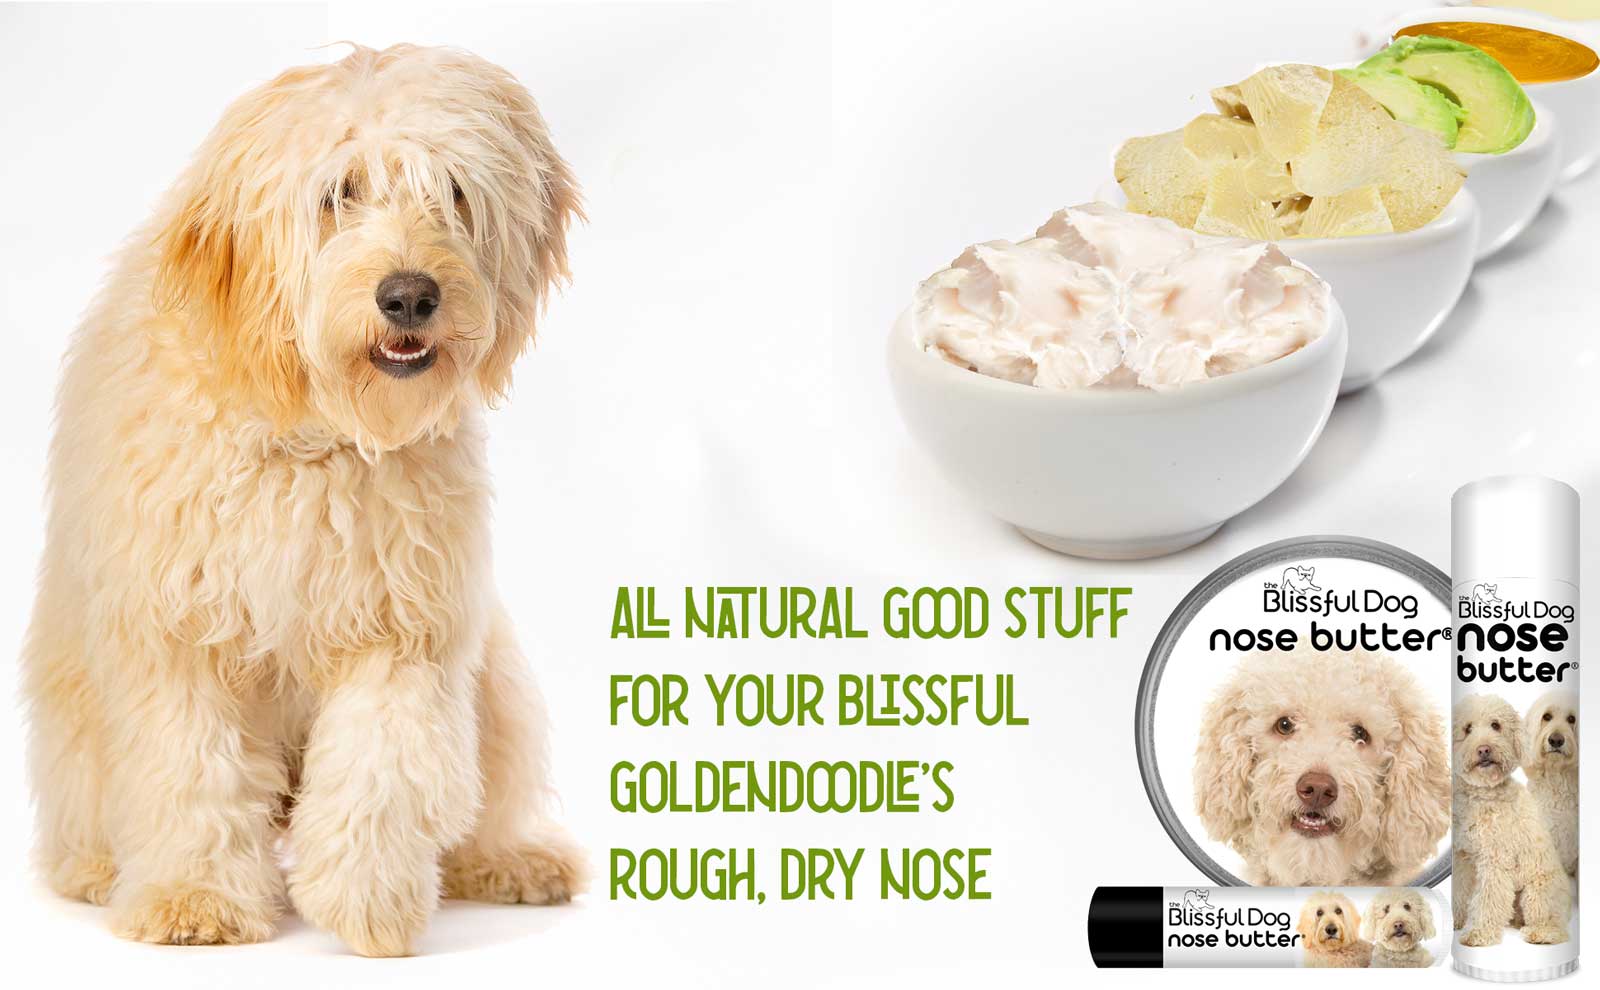 goldendoodle dry nose